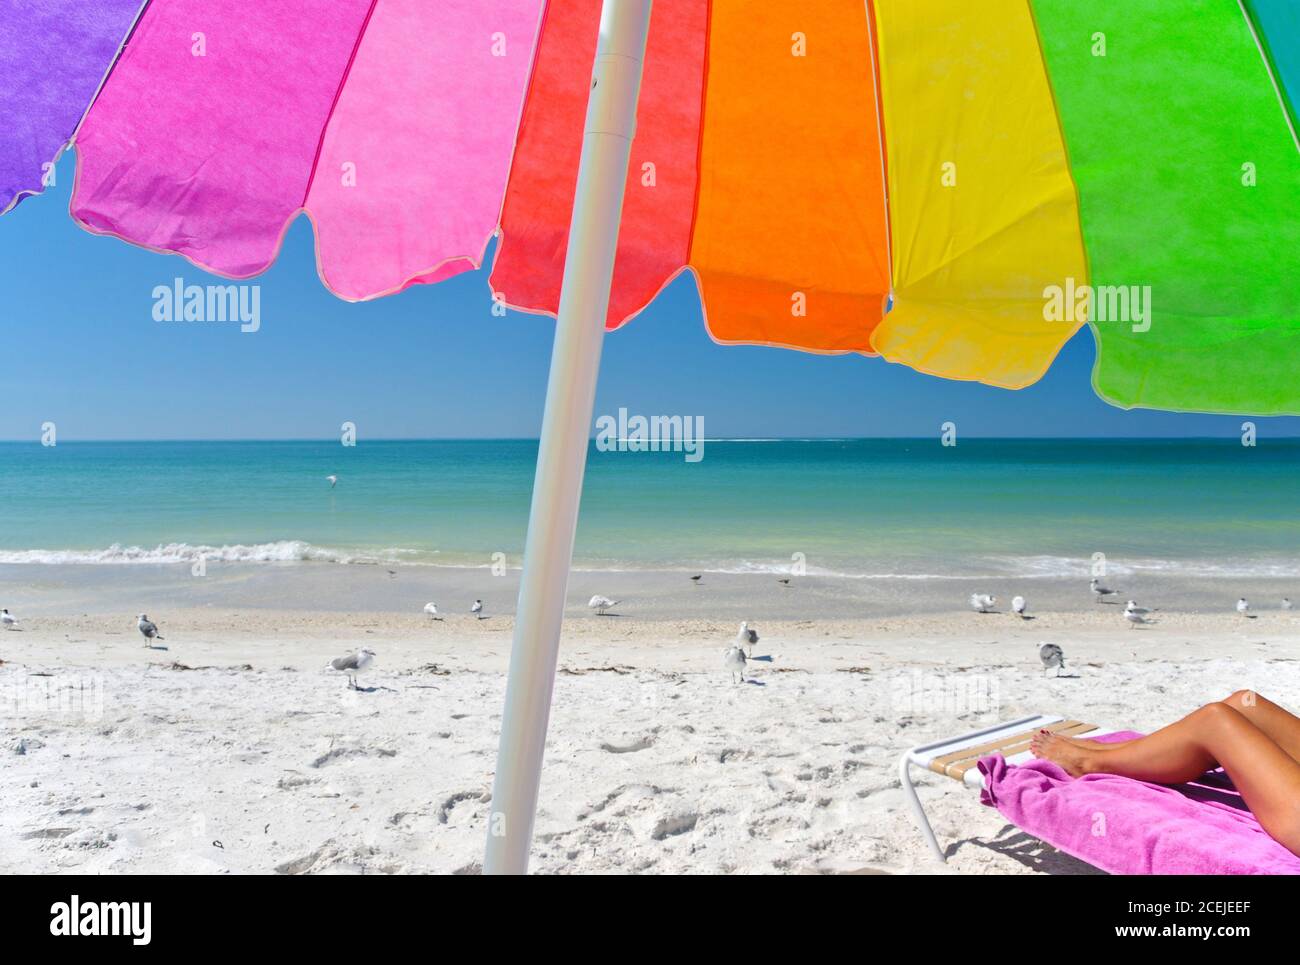 A Multi-Clored Beach Umbrella with a Woman's Legs Showing on a Chair on the Beach While Enjoying the Sunny Day. Stock Photo